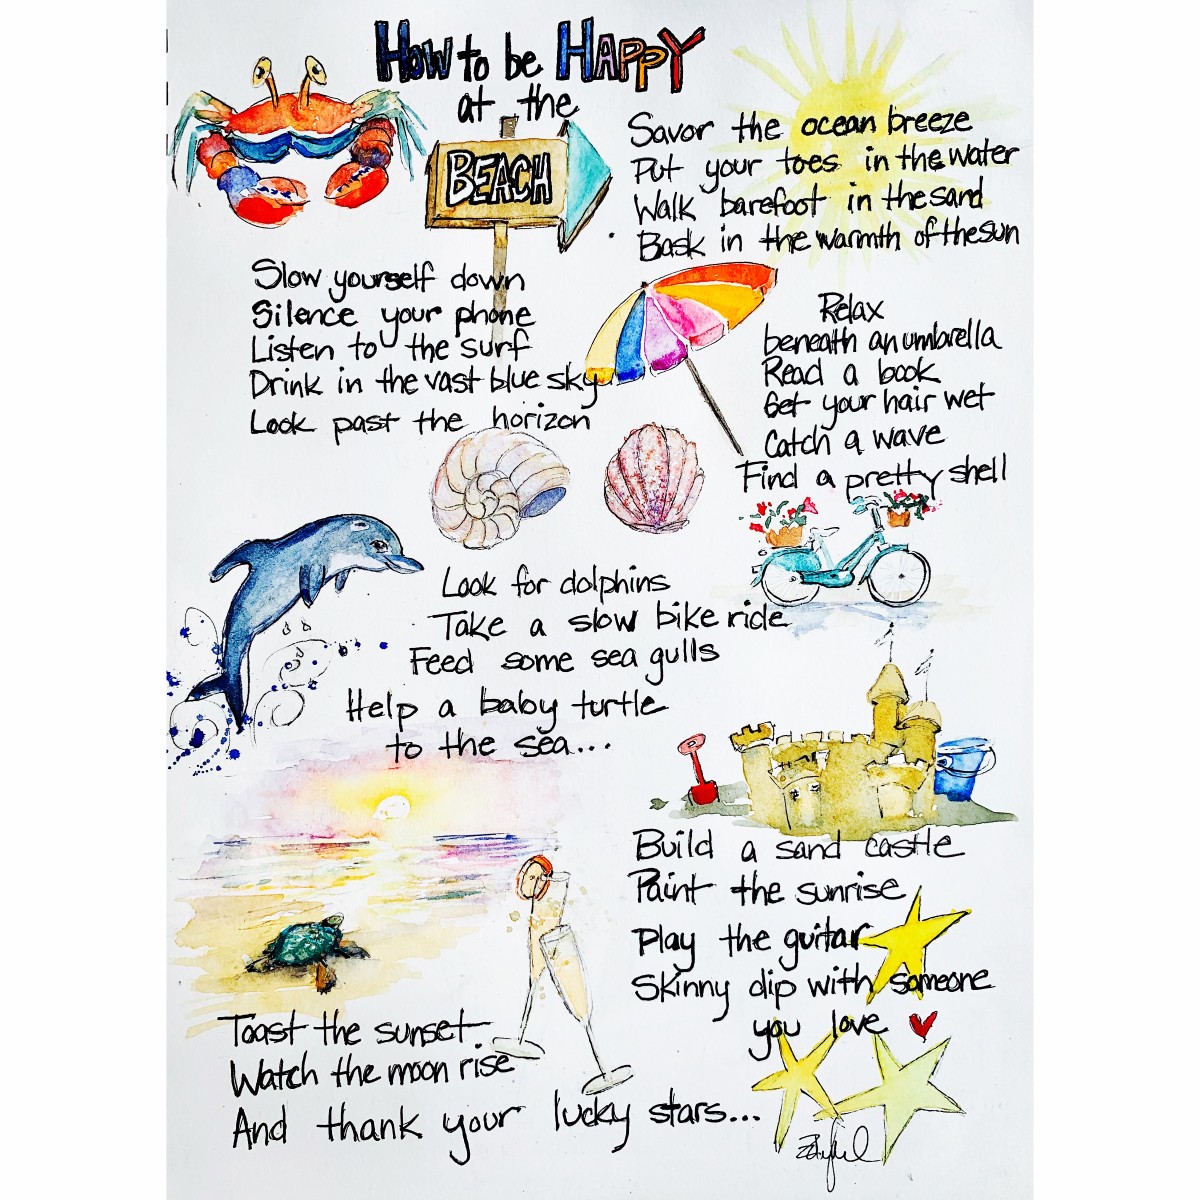 How to be Happy at the Beach by Rebecca Zdybel 